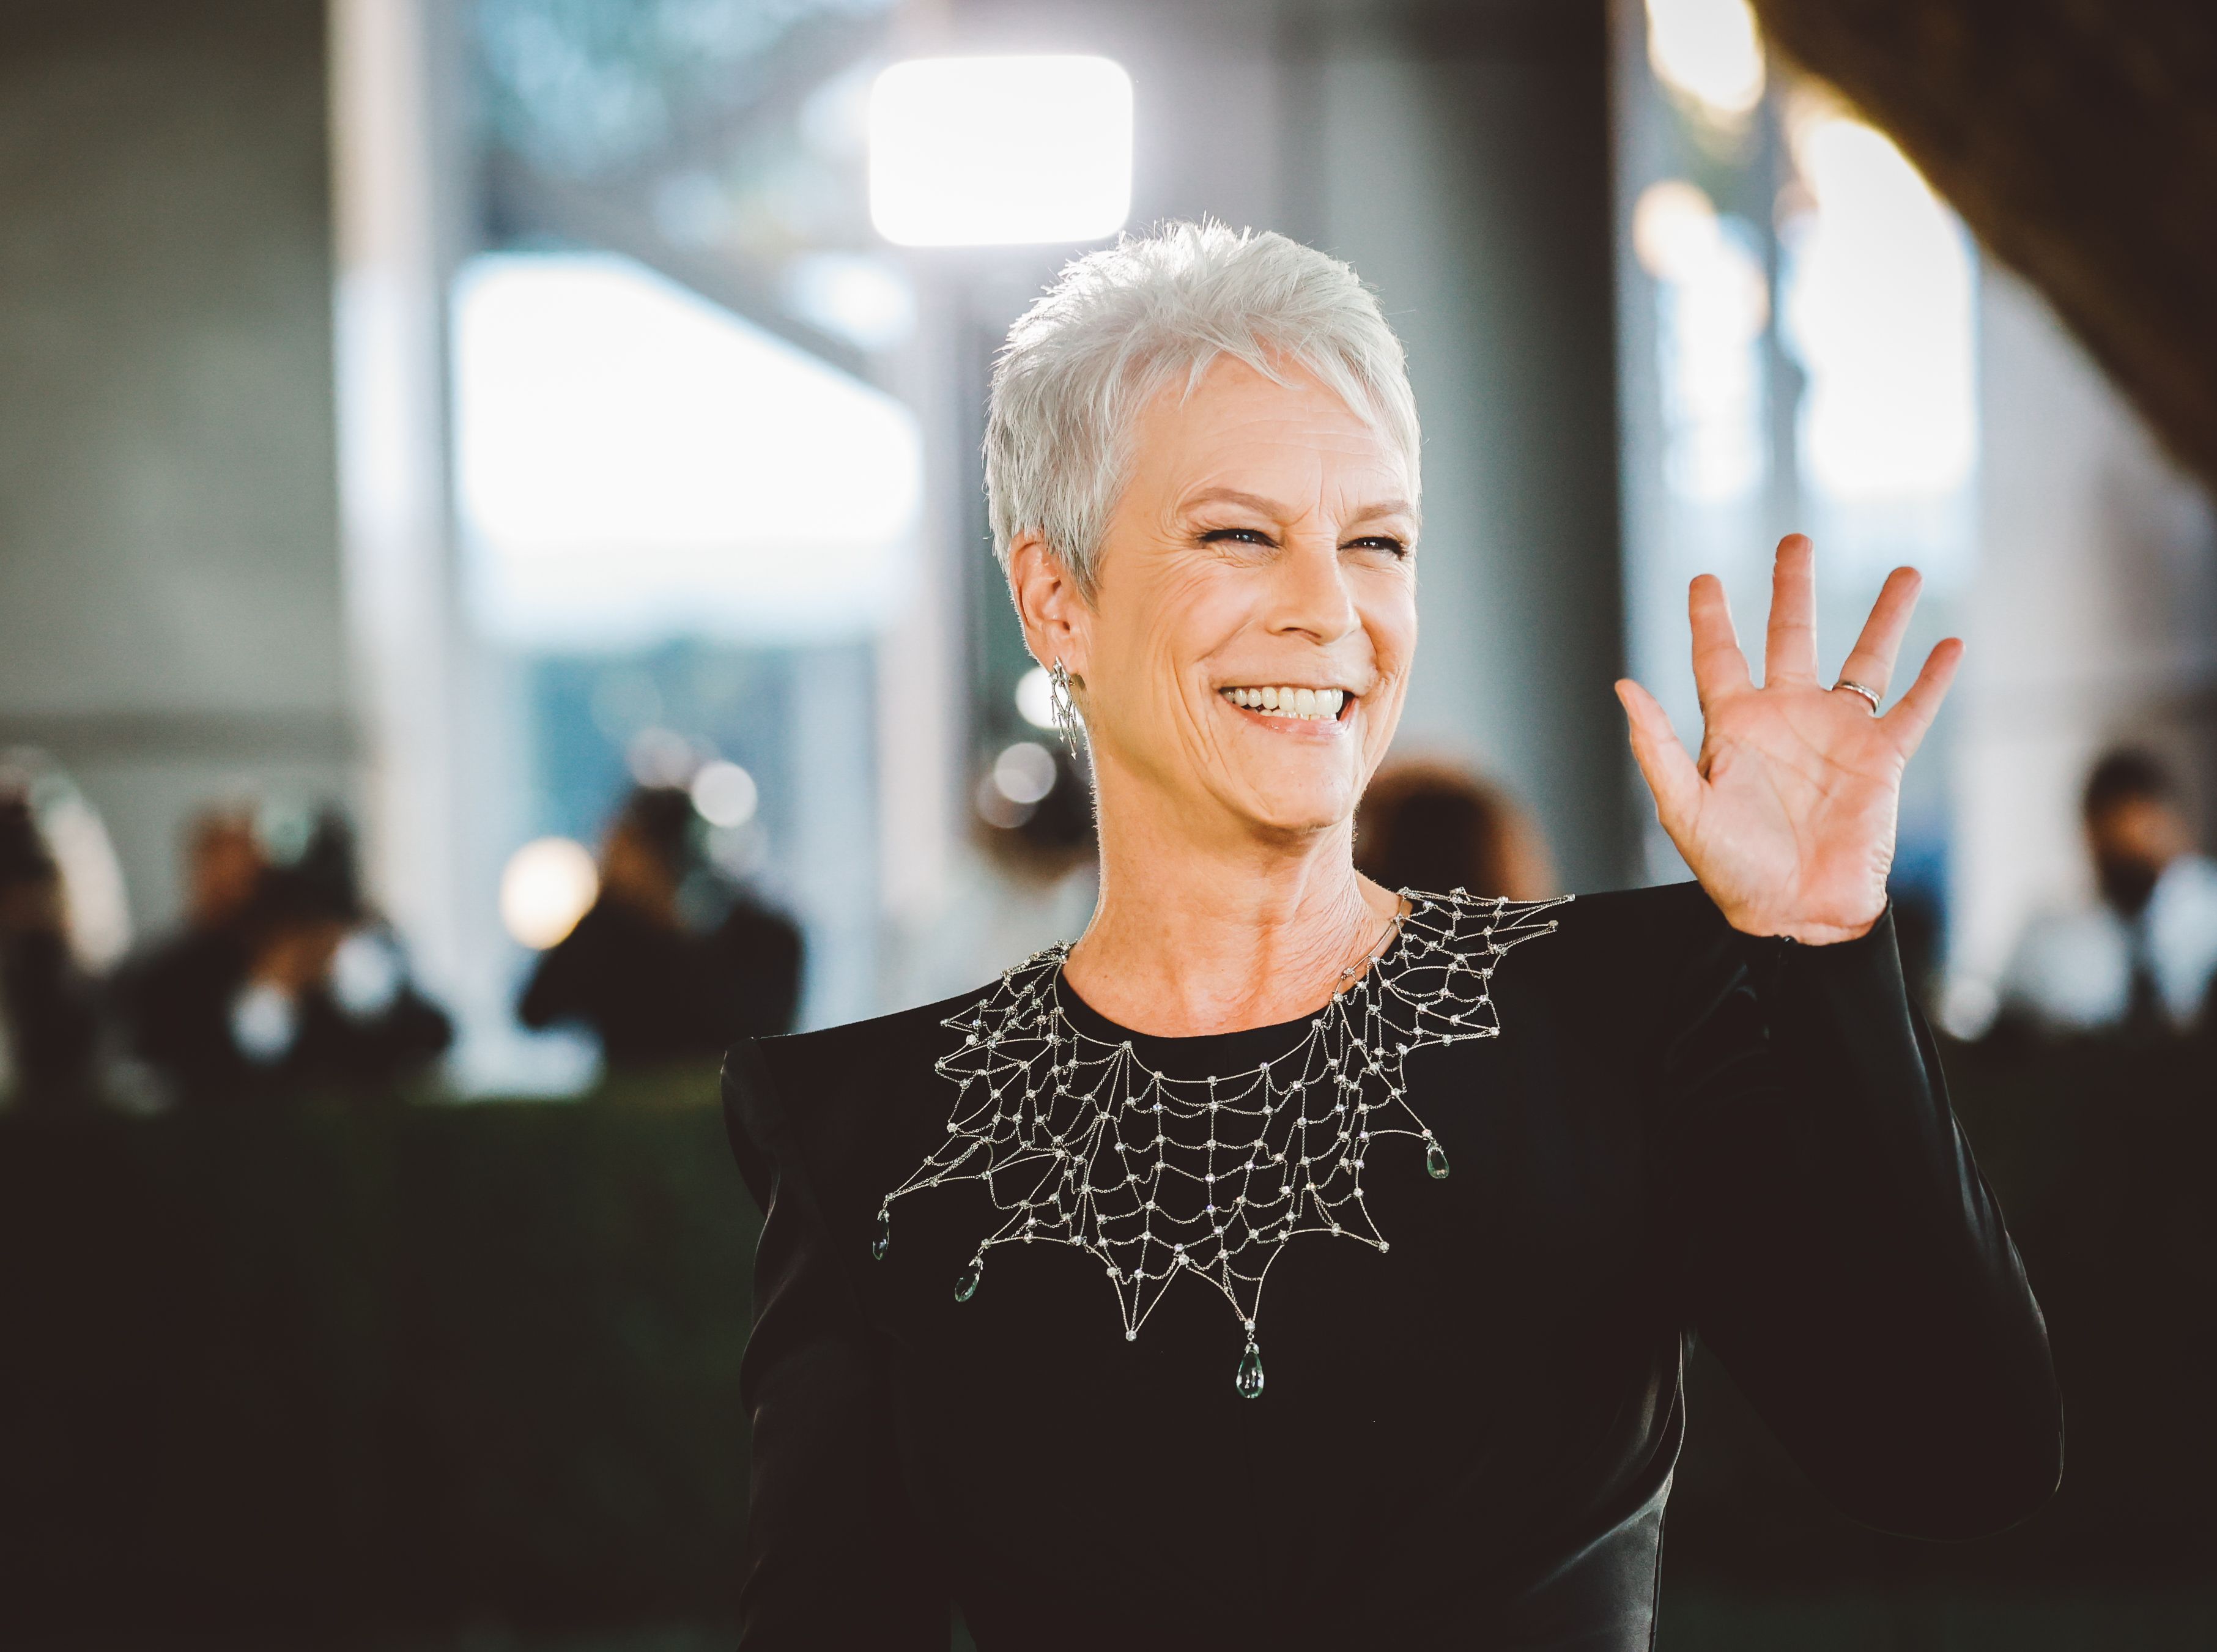 Jamie Lee Curtis shares her emotional reaction to first Oscar nomination